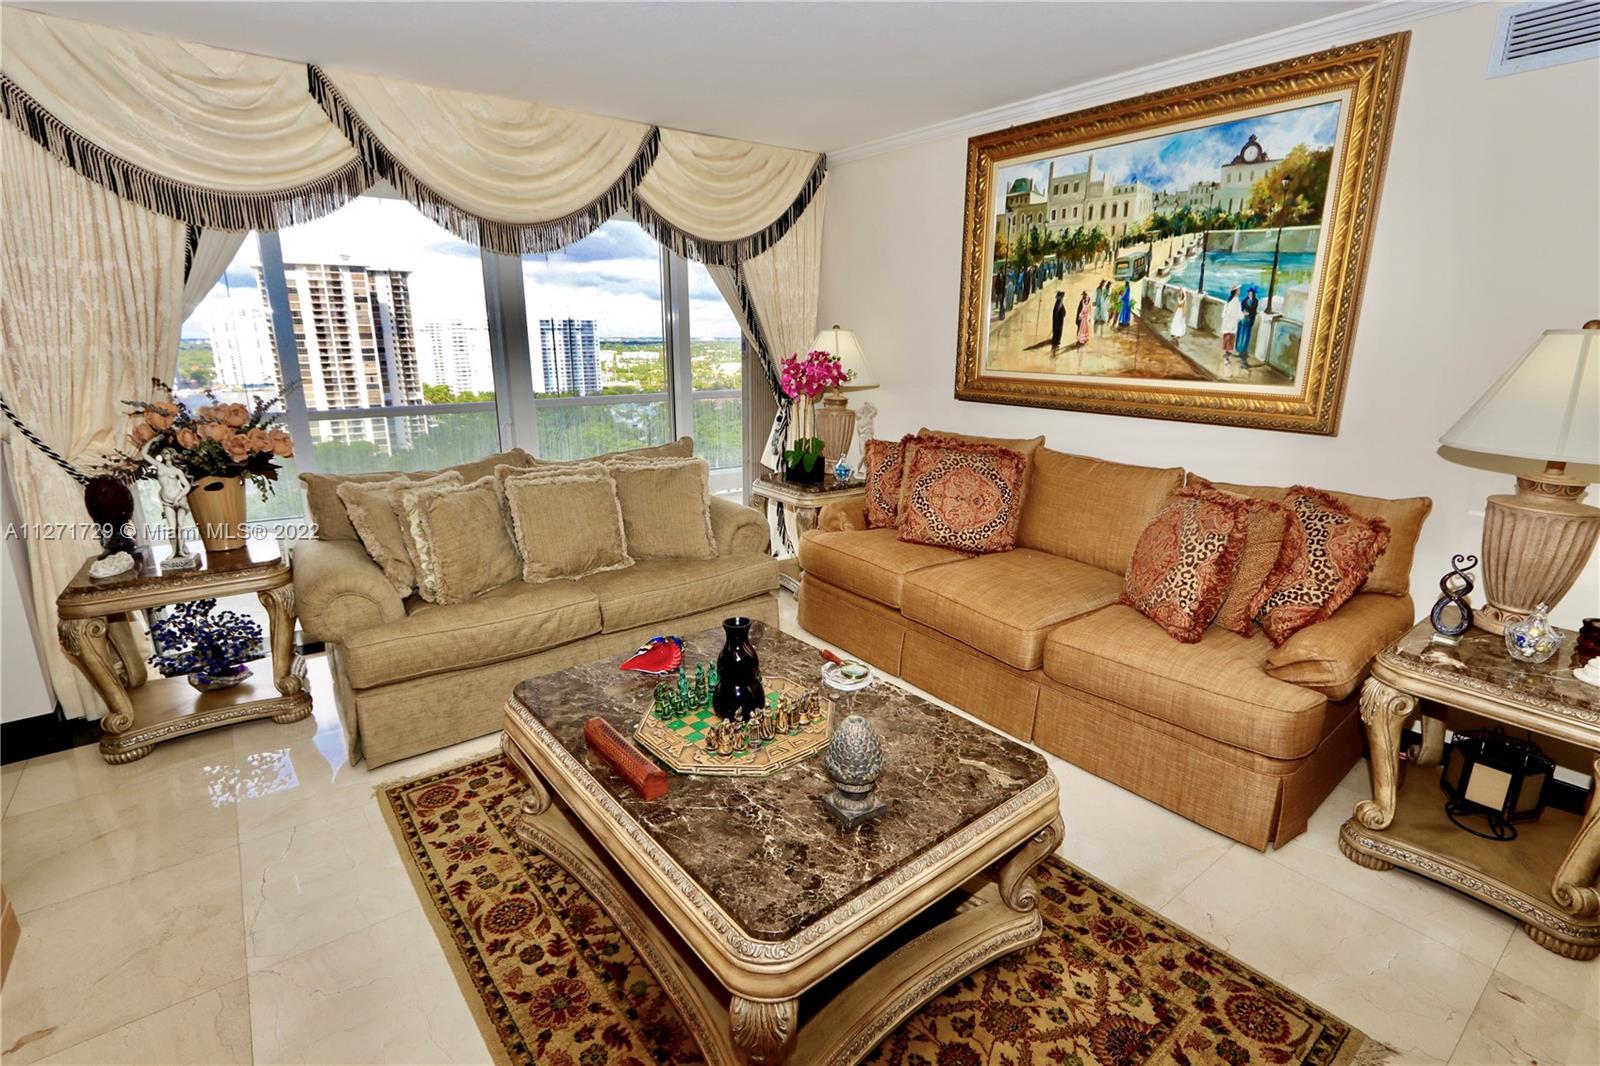 GREAT VIEWS  FROM THIS LARGE 2 BEDROOM/ 2 BATH UNIT IN VILLA MARINA AT WILLIAMS ISLAND.  LARGE WALK-